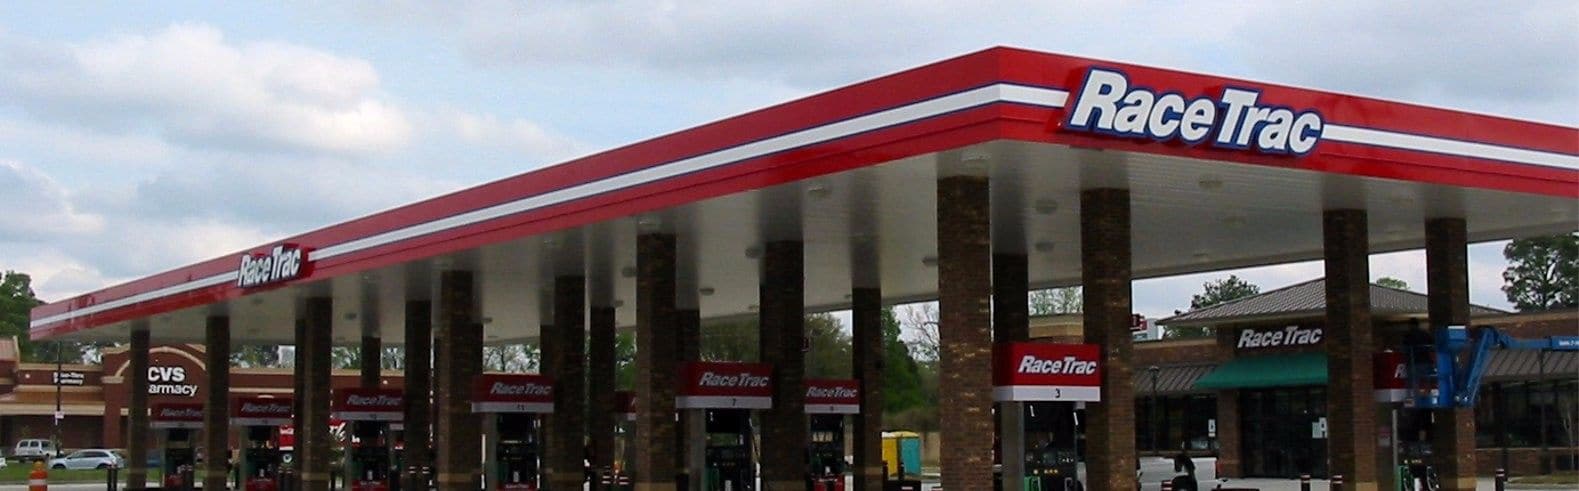 Gas station signage for Racetrac by Ortwein Sign